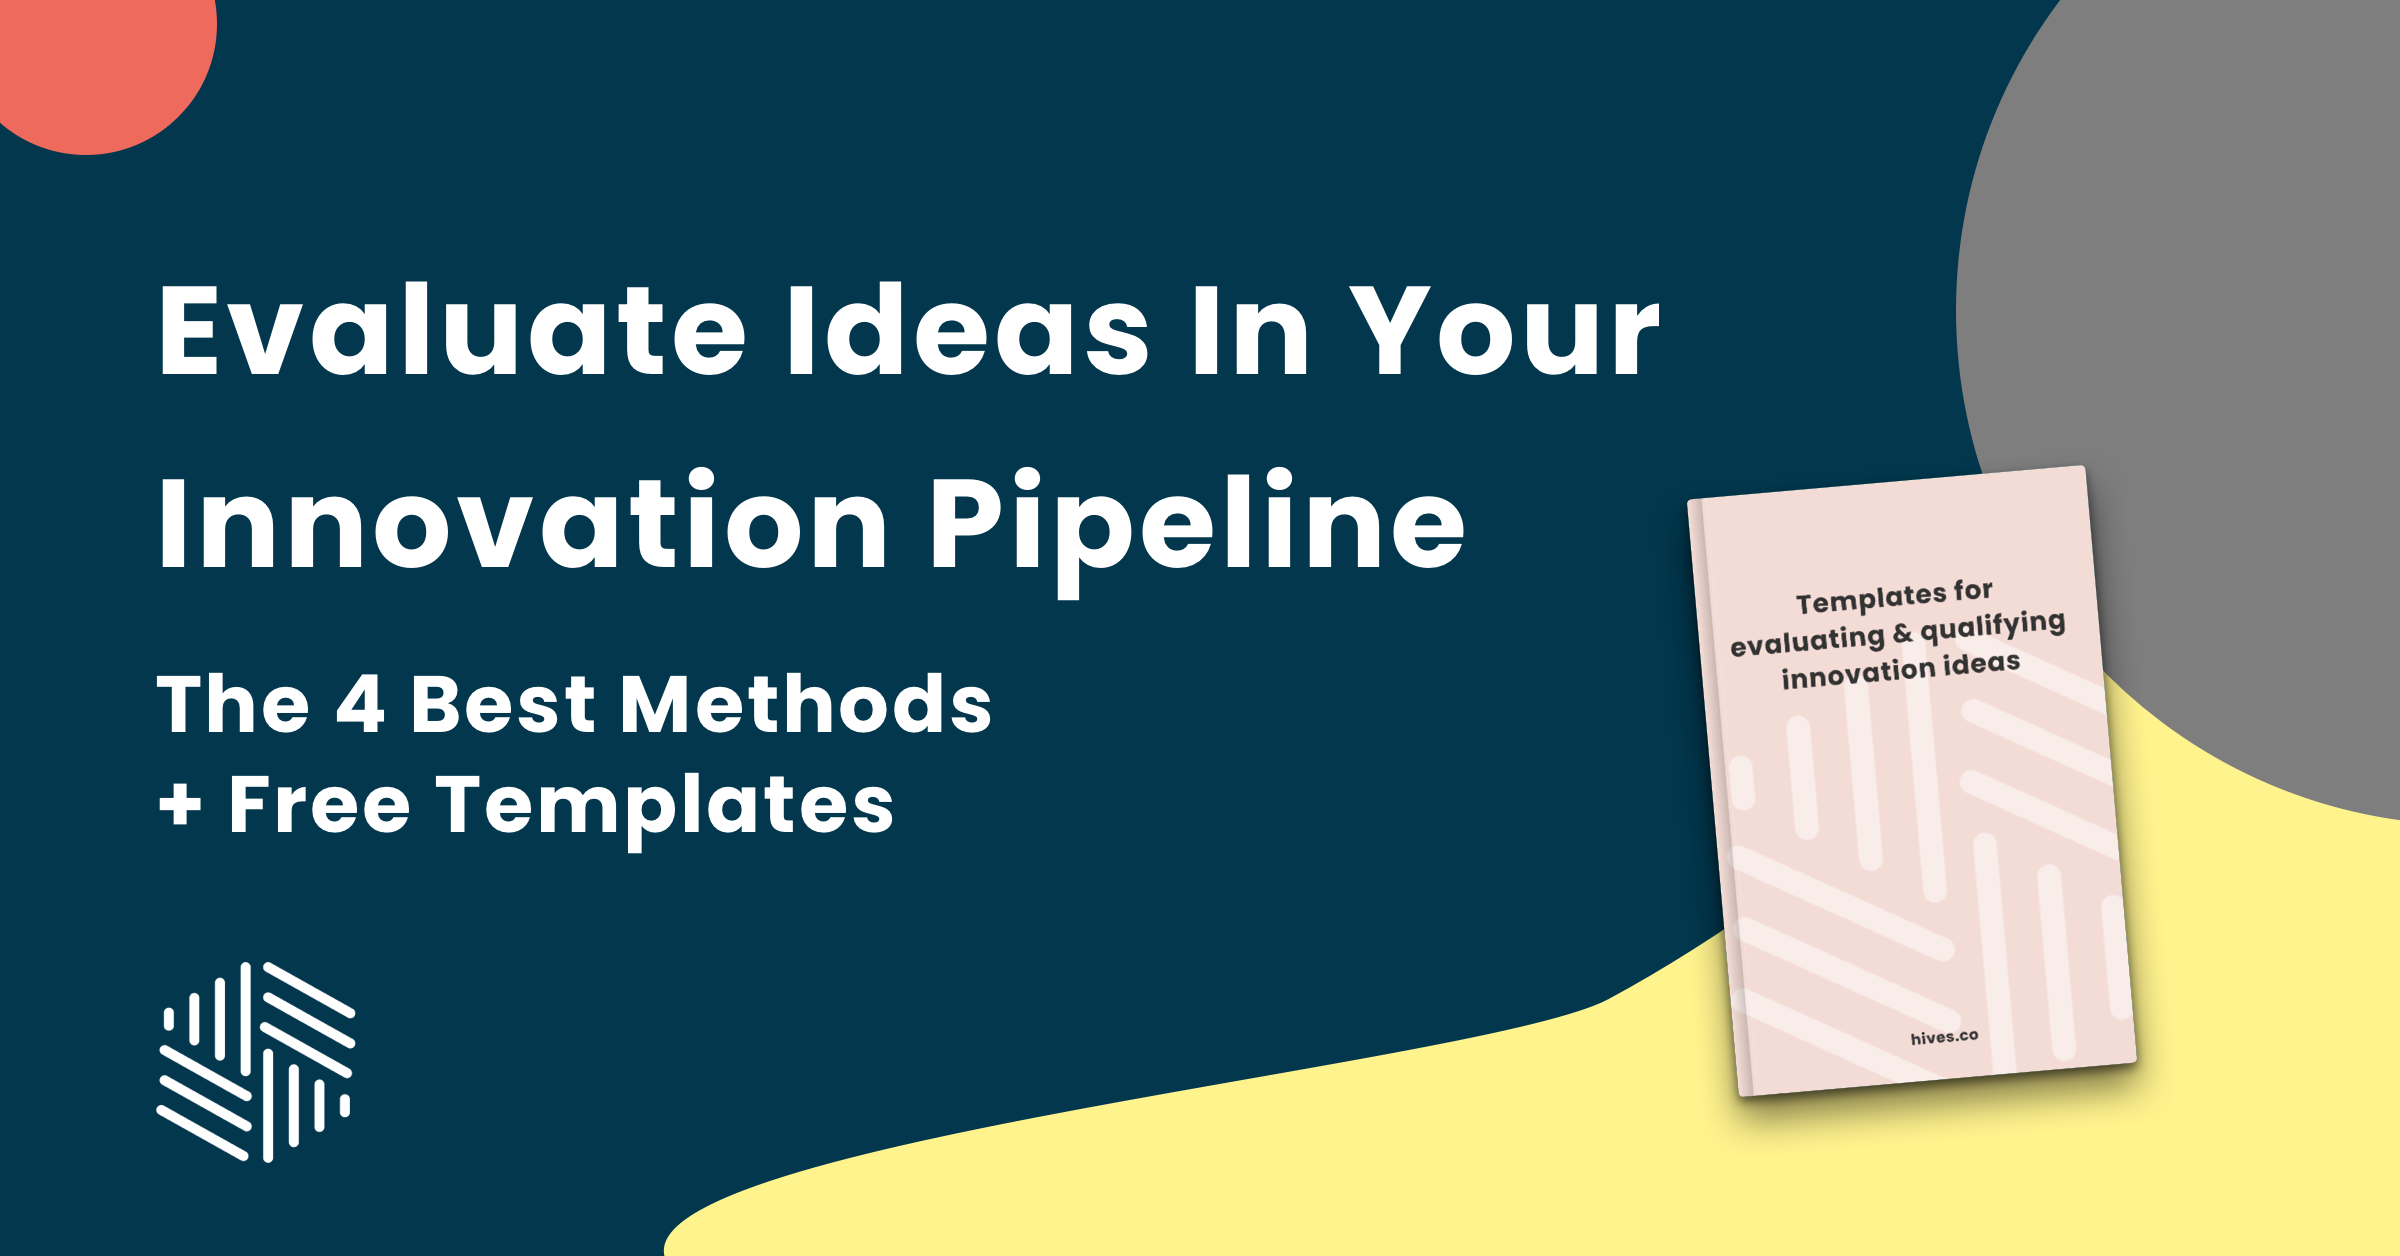 How to evaluate Innovation Ideas templates